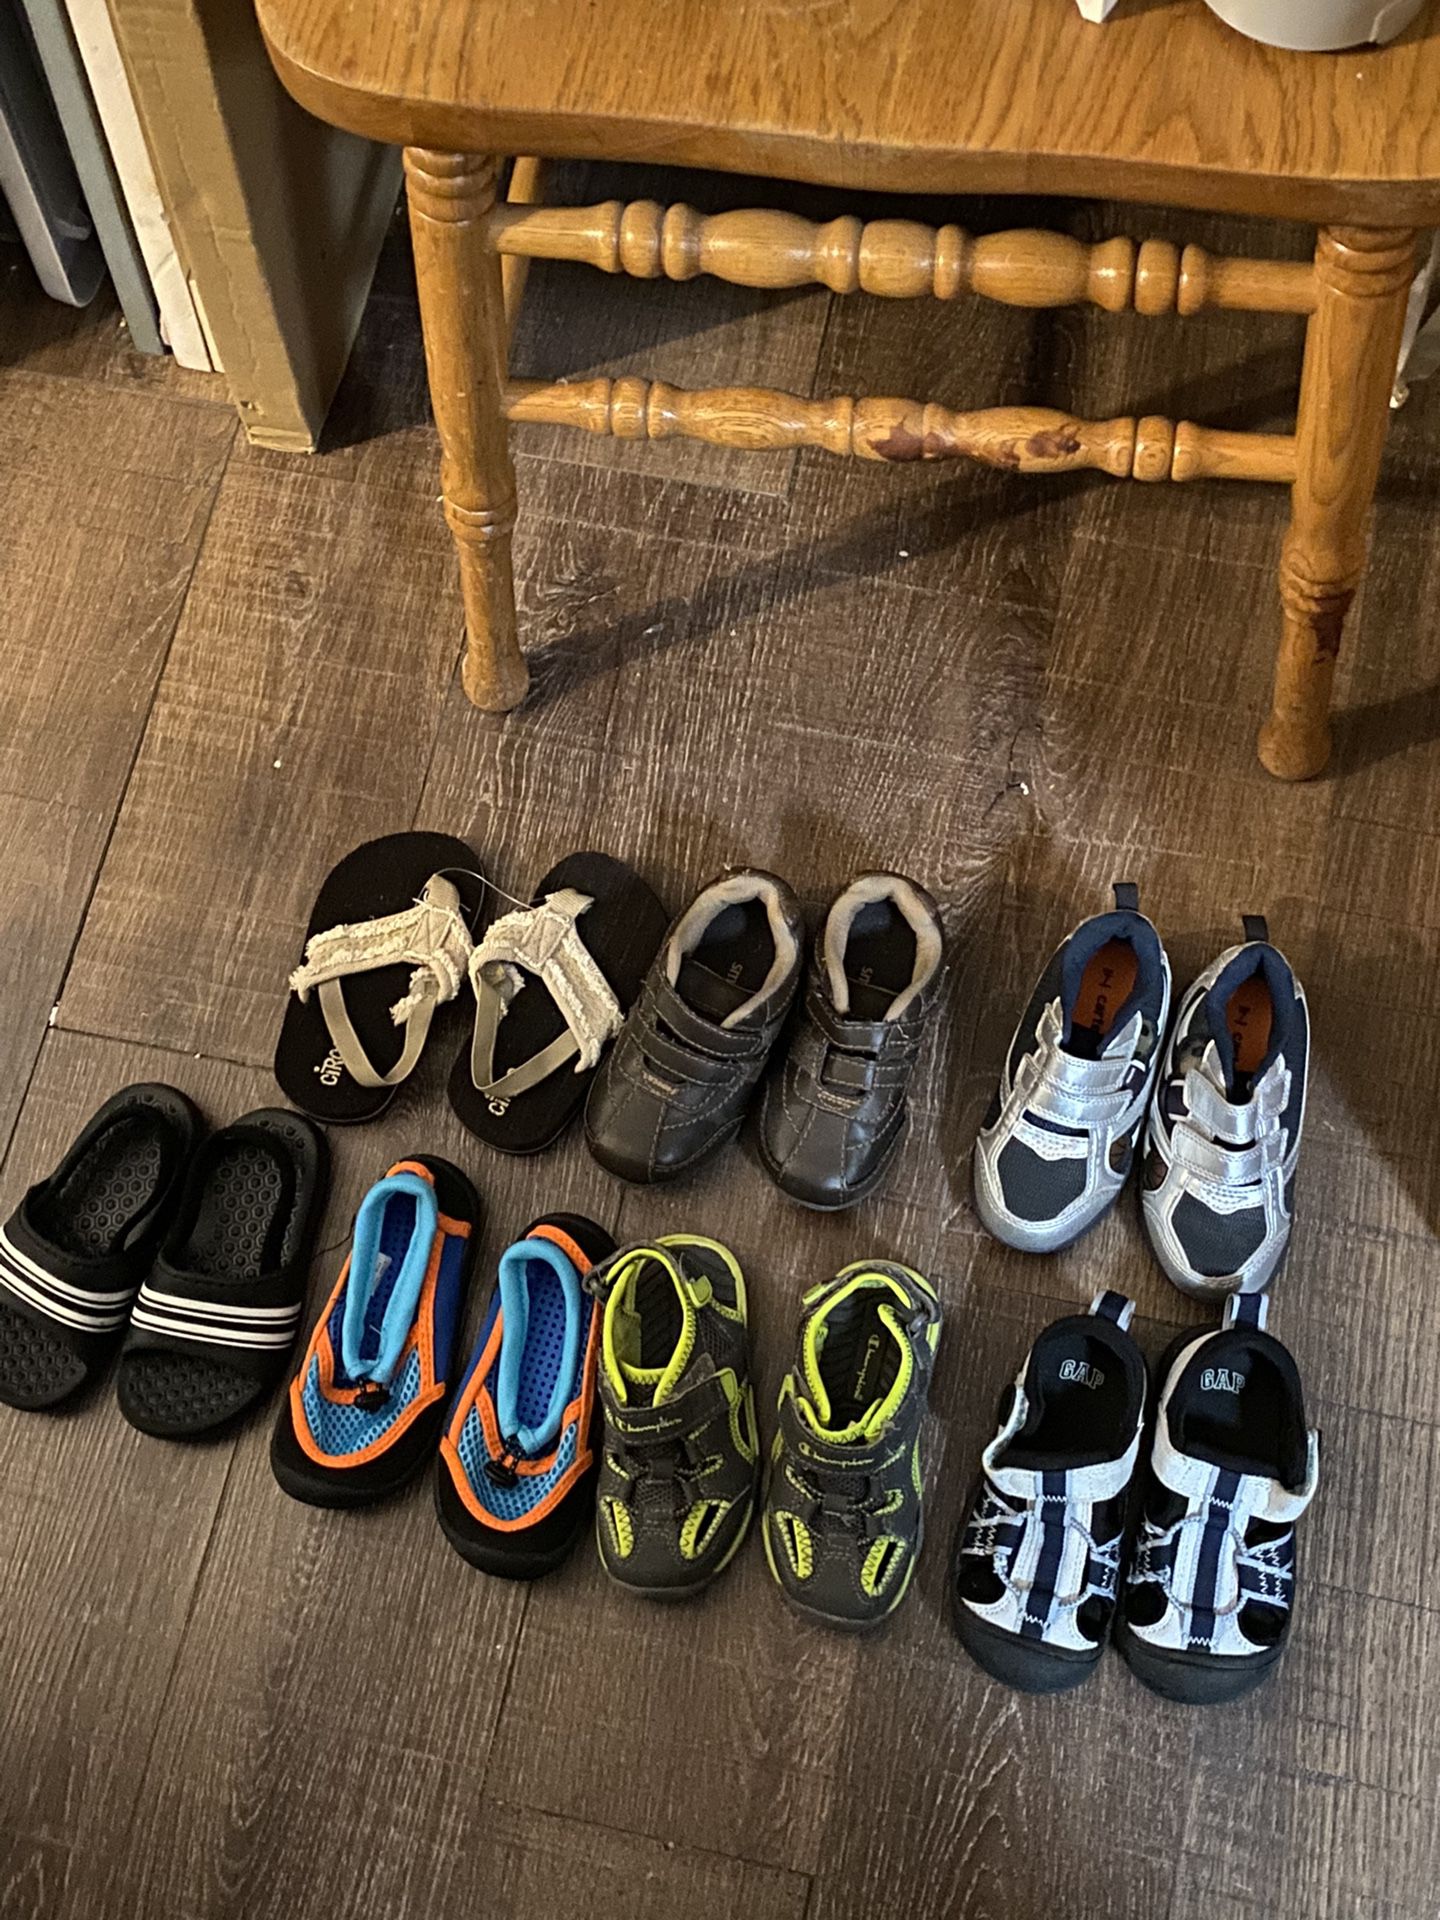 Boys Toddler Shoes 